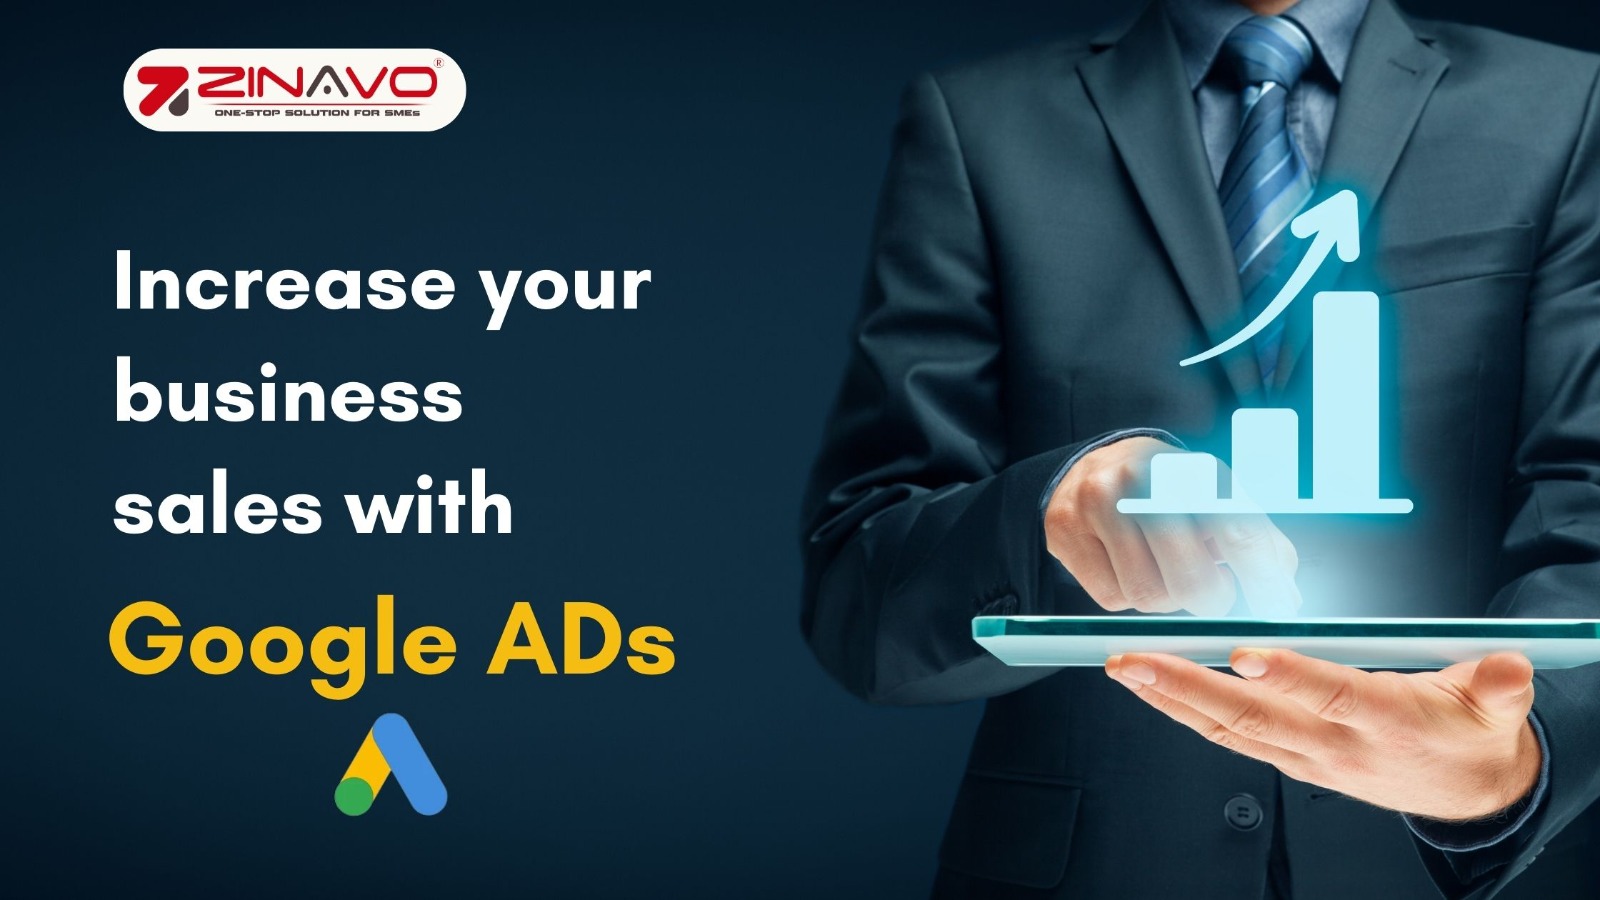 Increase your business sales with Google ADs